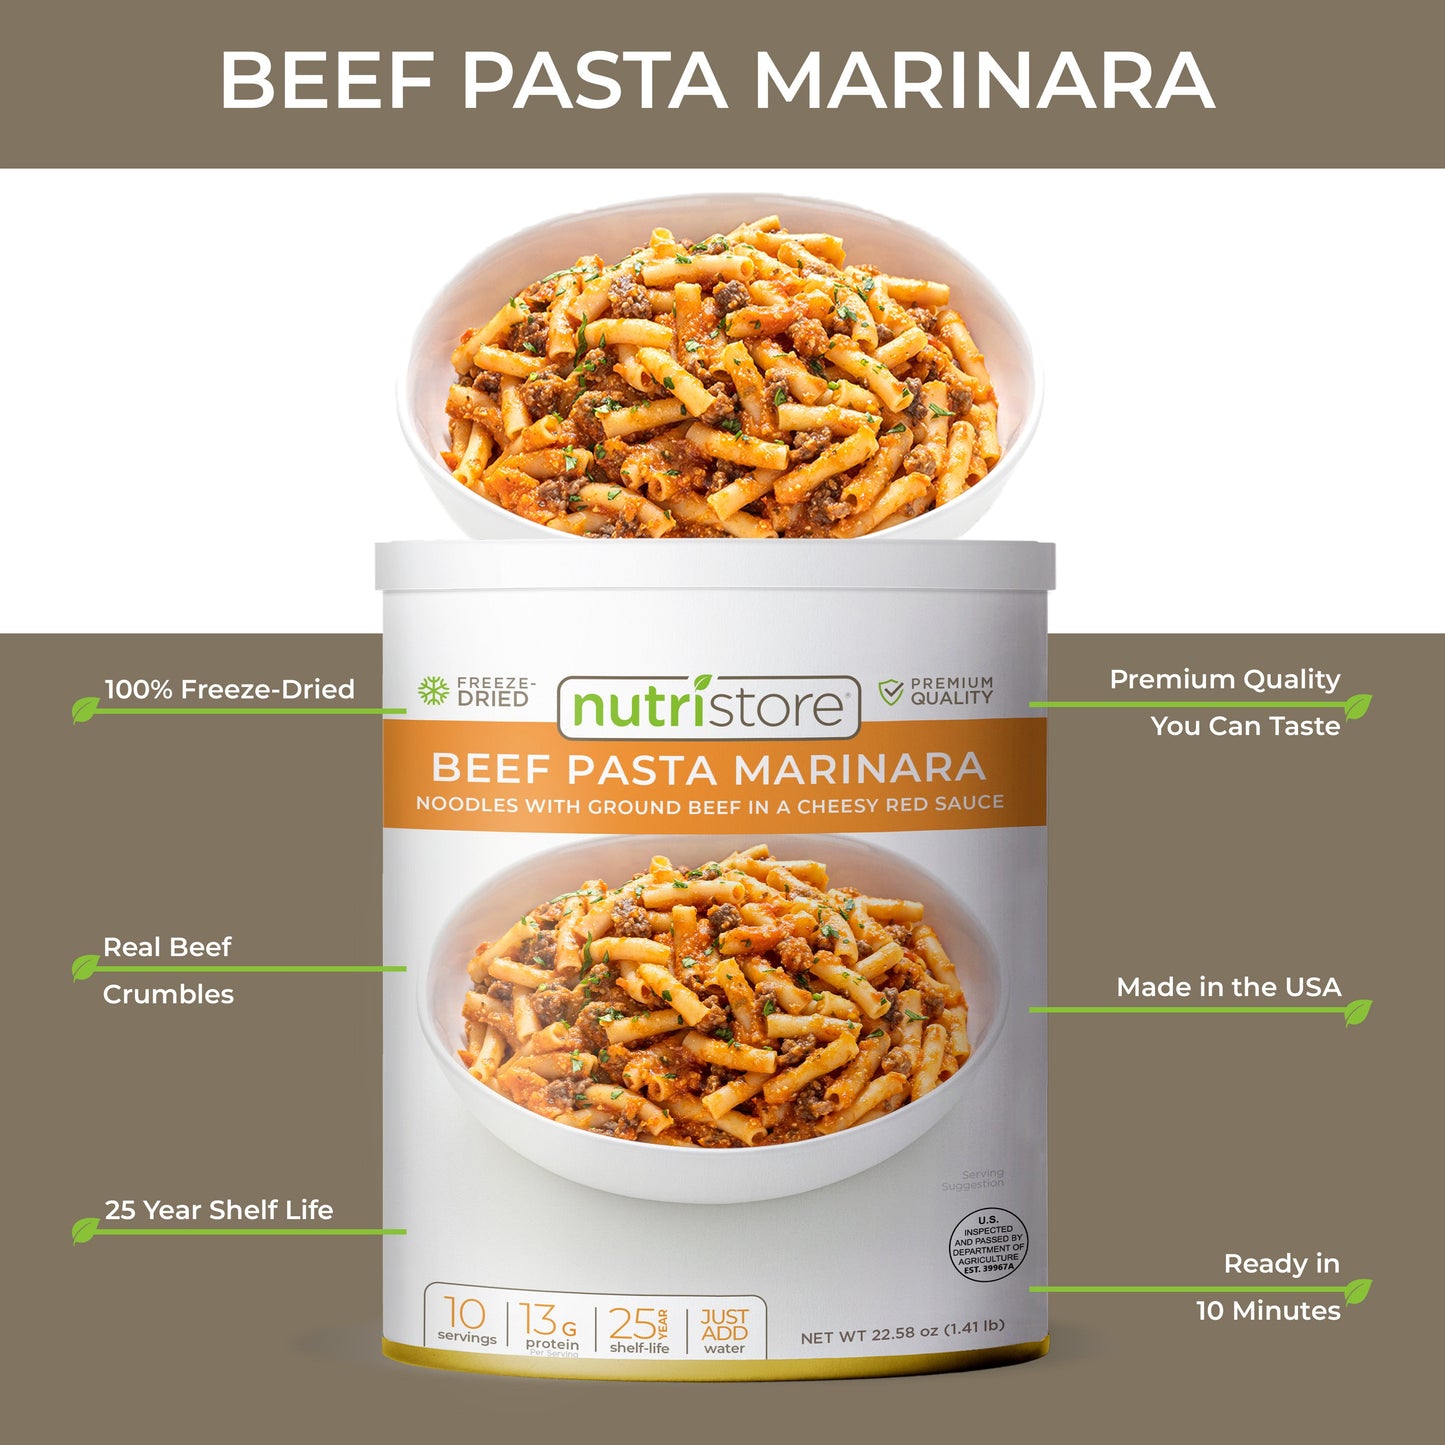 Beef Pasta Marinara - #10 Can by Nutristore